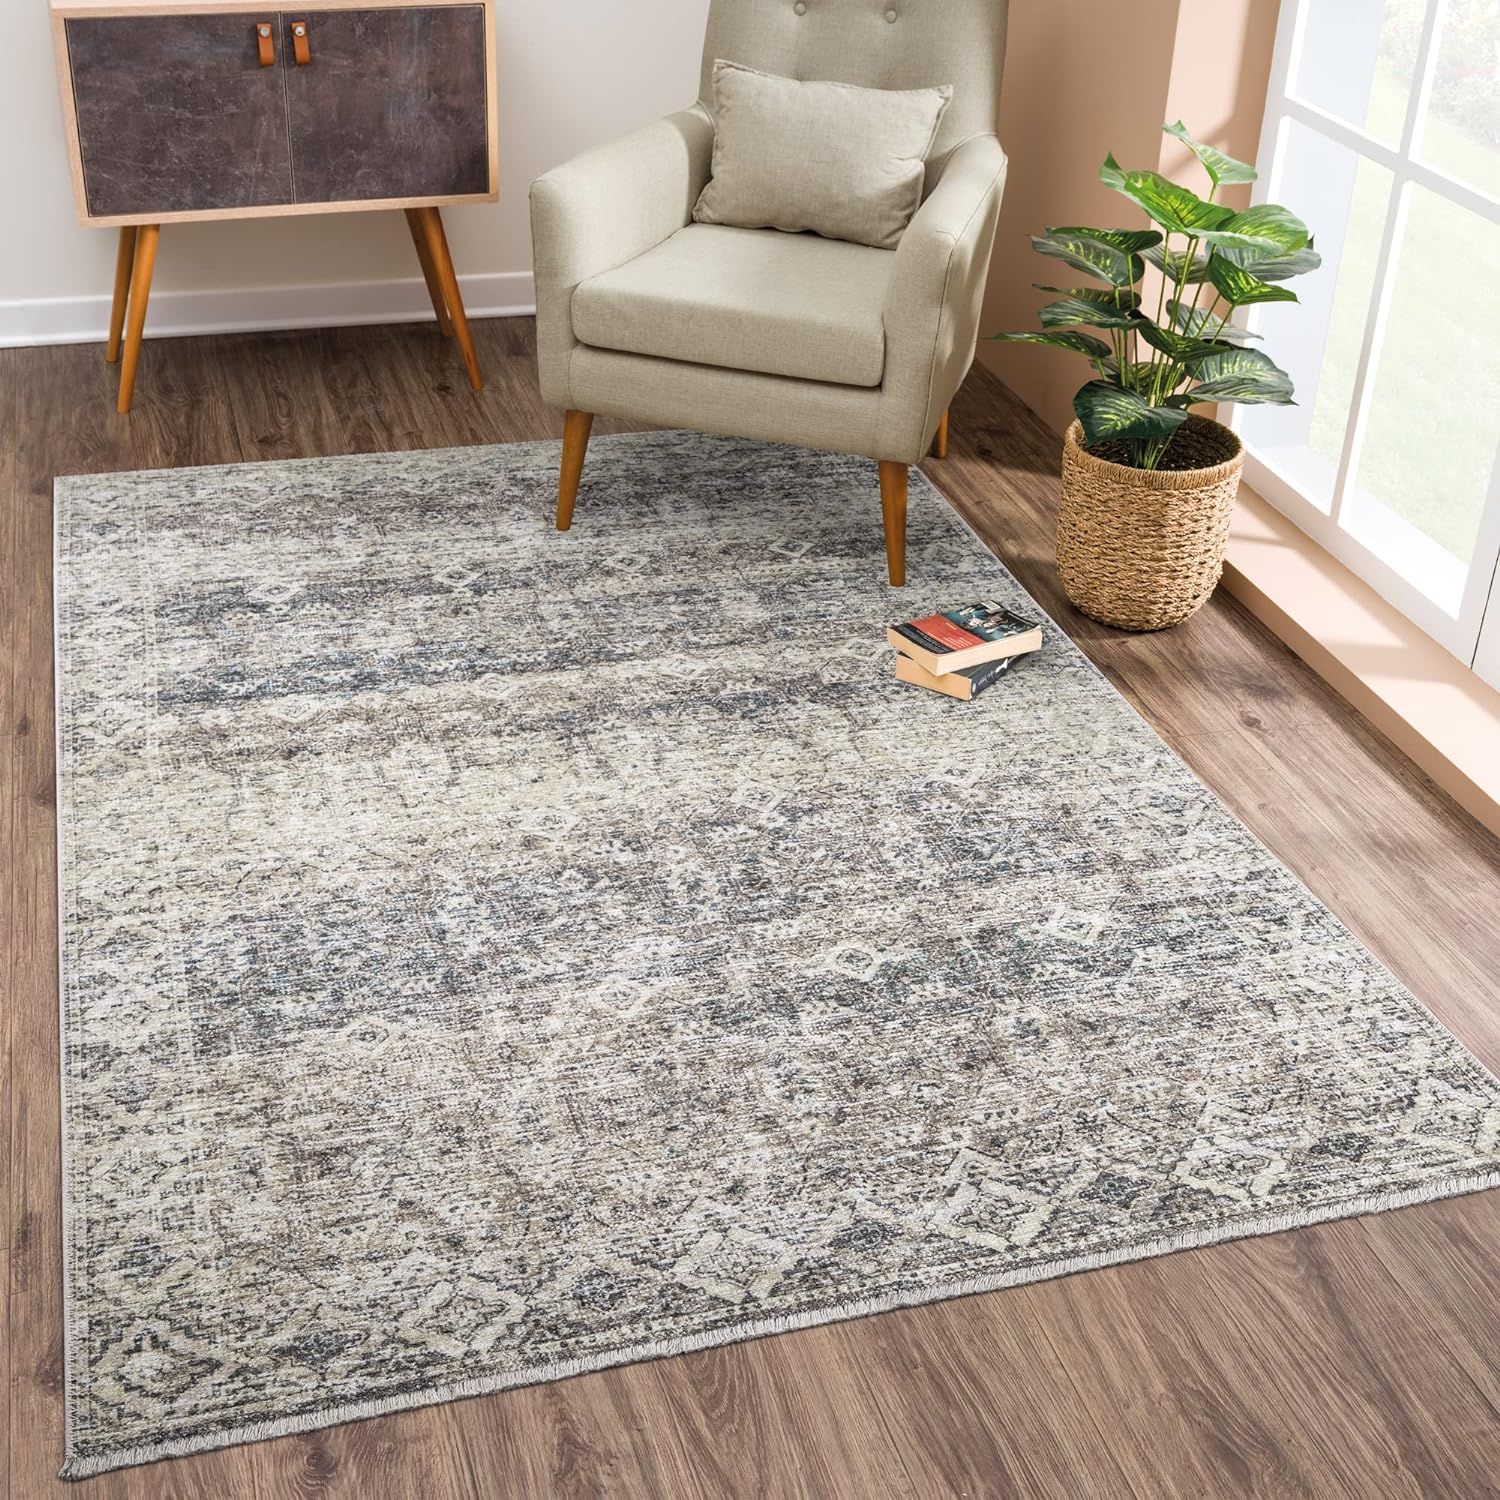 Bloom Rugs Caria Washable Non-Slip 9x12 Rug - Beige Brown/Teal Traditional Area Rug for Living Ro... | Amazon (US)